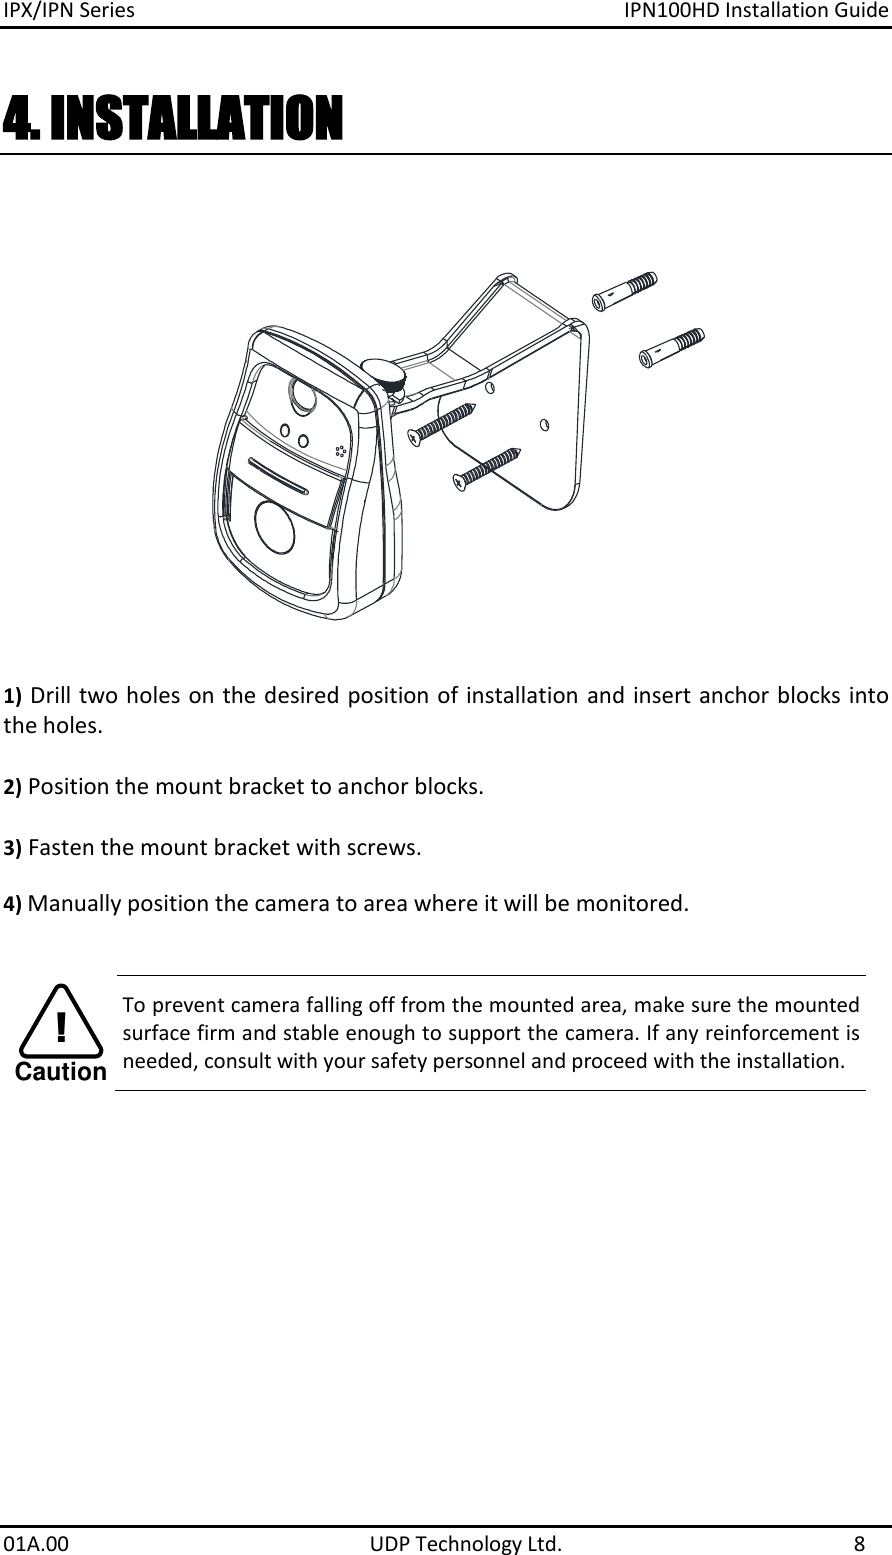 IPX/IPN Series  IPN100HD Installation Guide 01A.00    UDP Technology Ltd.  8 4. INSTALLATION  1) Drill two holes on the desired position of installation and insert anchor blocks into the holes.   2) Position the mount bracket to anchor blocks.  3) Fasten the mount bracket with screws.  4) Manually position the camera to area where it will be monitored.      To prevent camera falling off from the mounted area, make sure the mounted surface firm and stable enough to support the camera. If any reinforcement is needed, consult with your safety personnel and proceed with the installation. Caution!